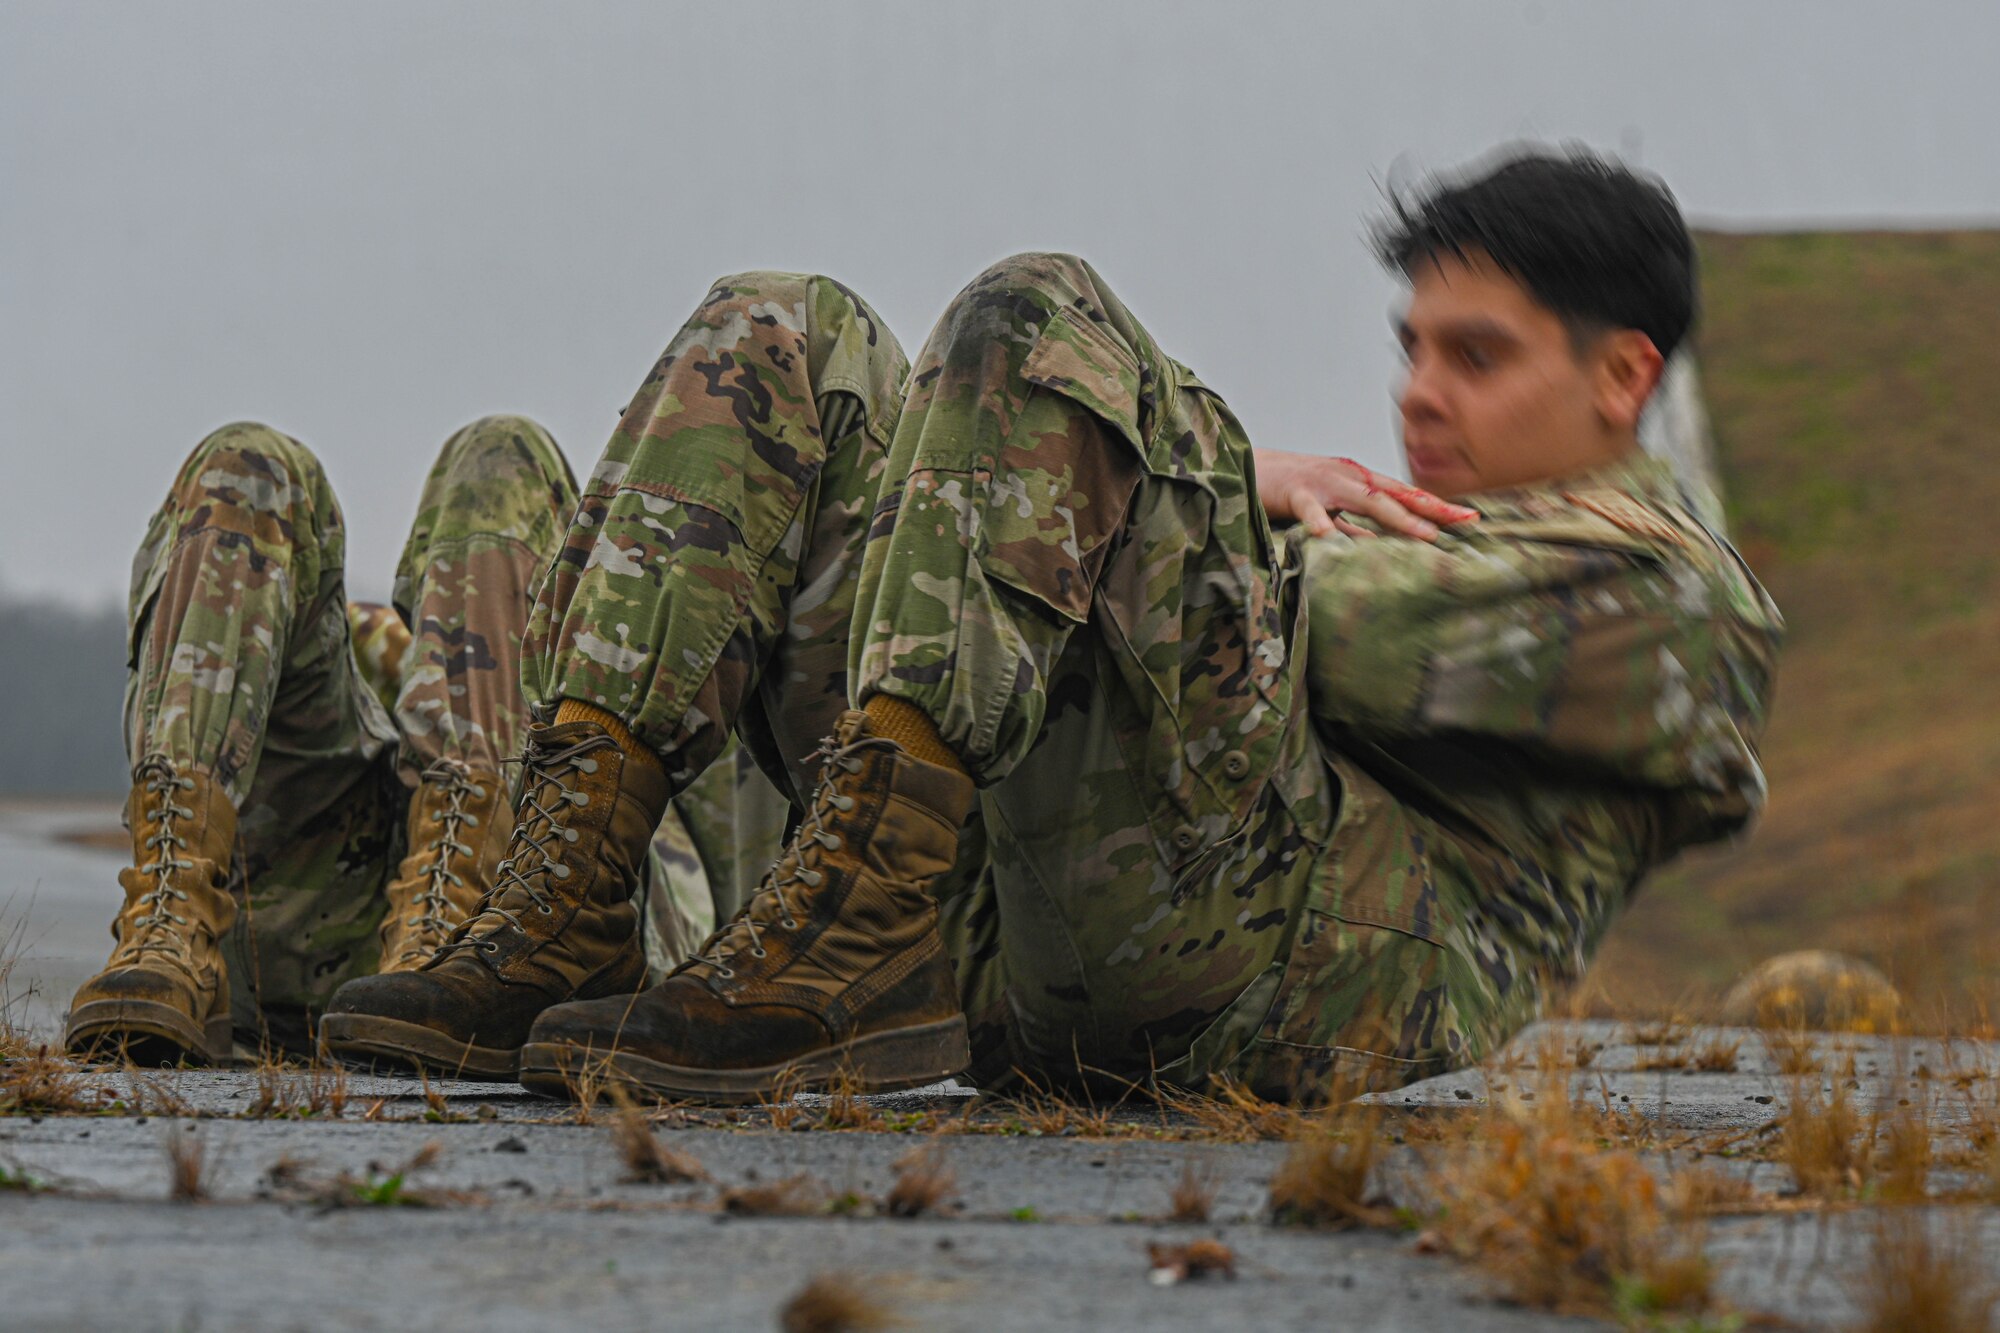 An airman assigned to the 19th Maintenance Squadron completes sit-ups during the Readiness Games at Little Rock Air Force Base, Arkansas.